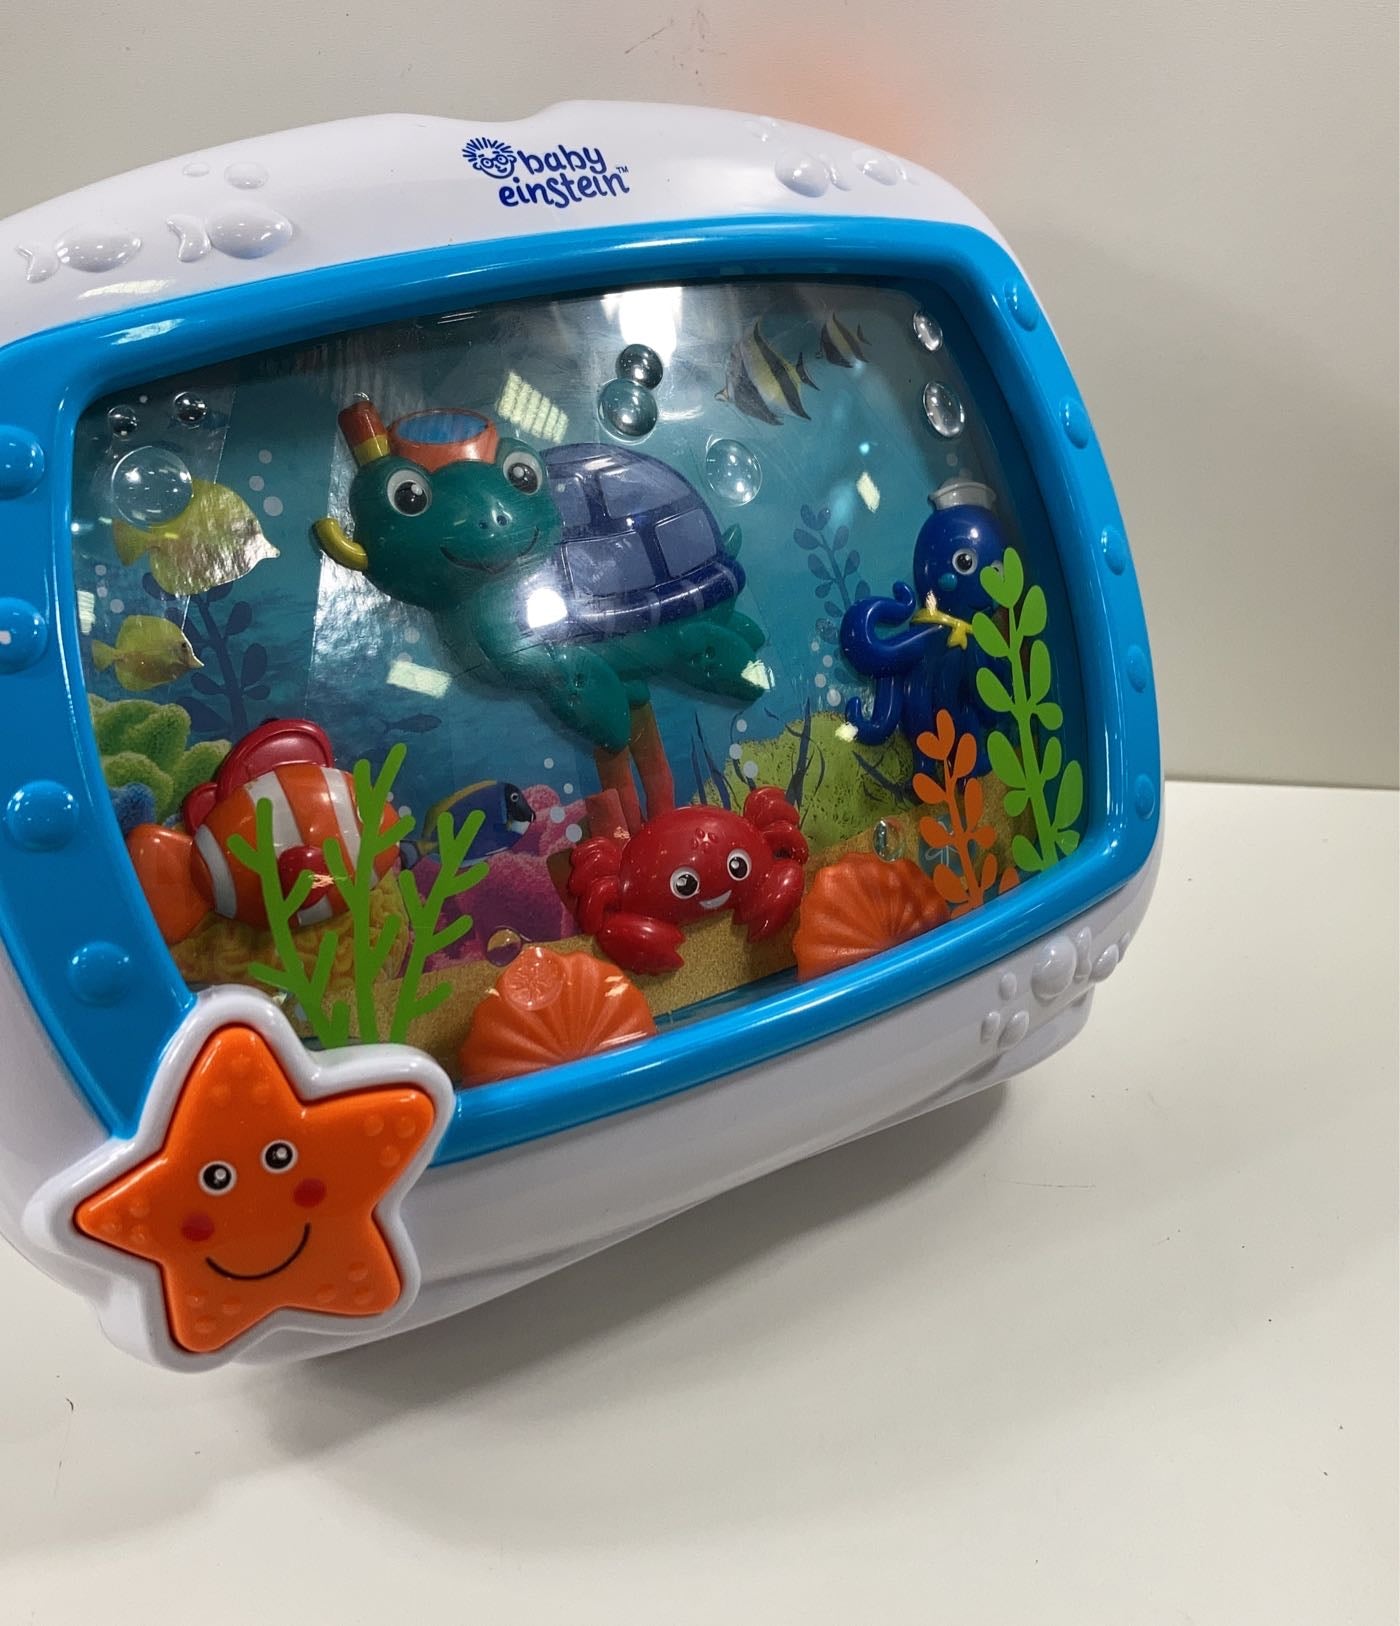 Baby Einstein Sea Dreams Soother - Features Real-Life Imagery, No